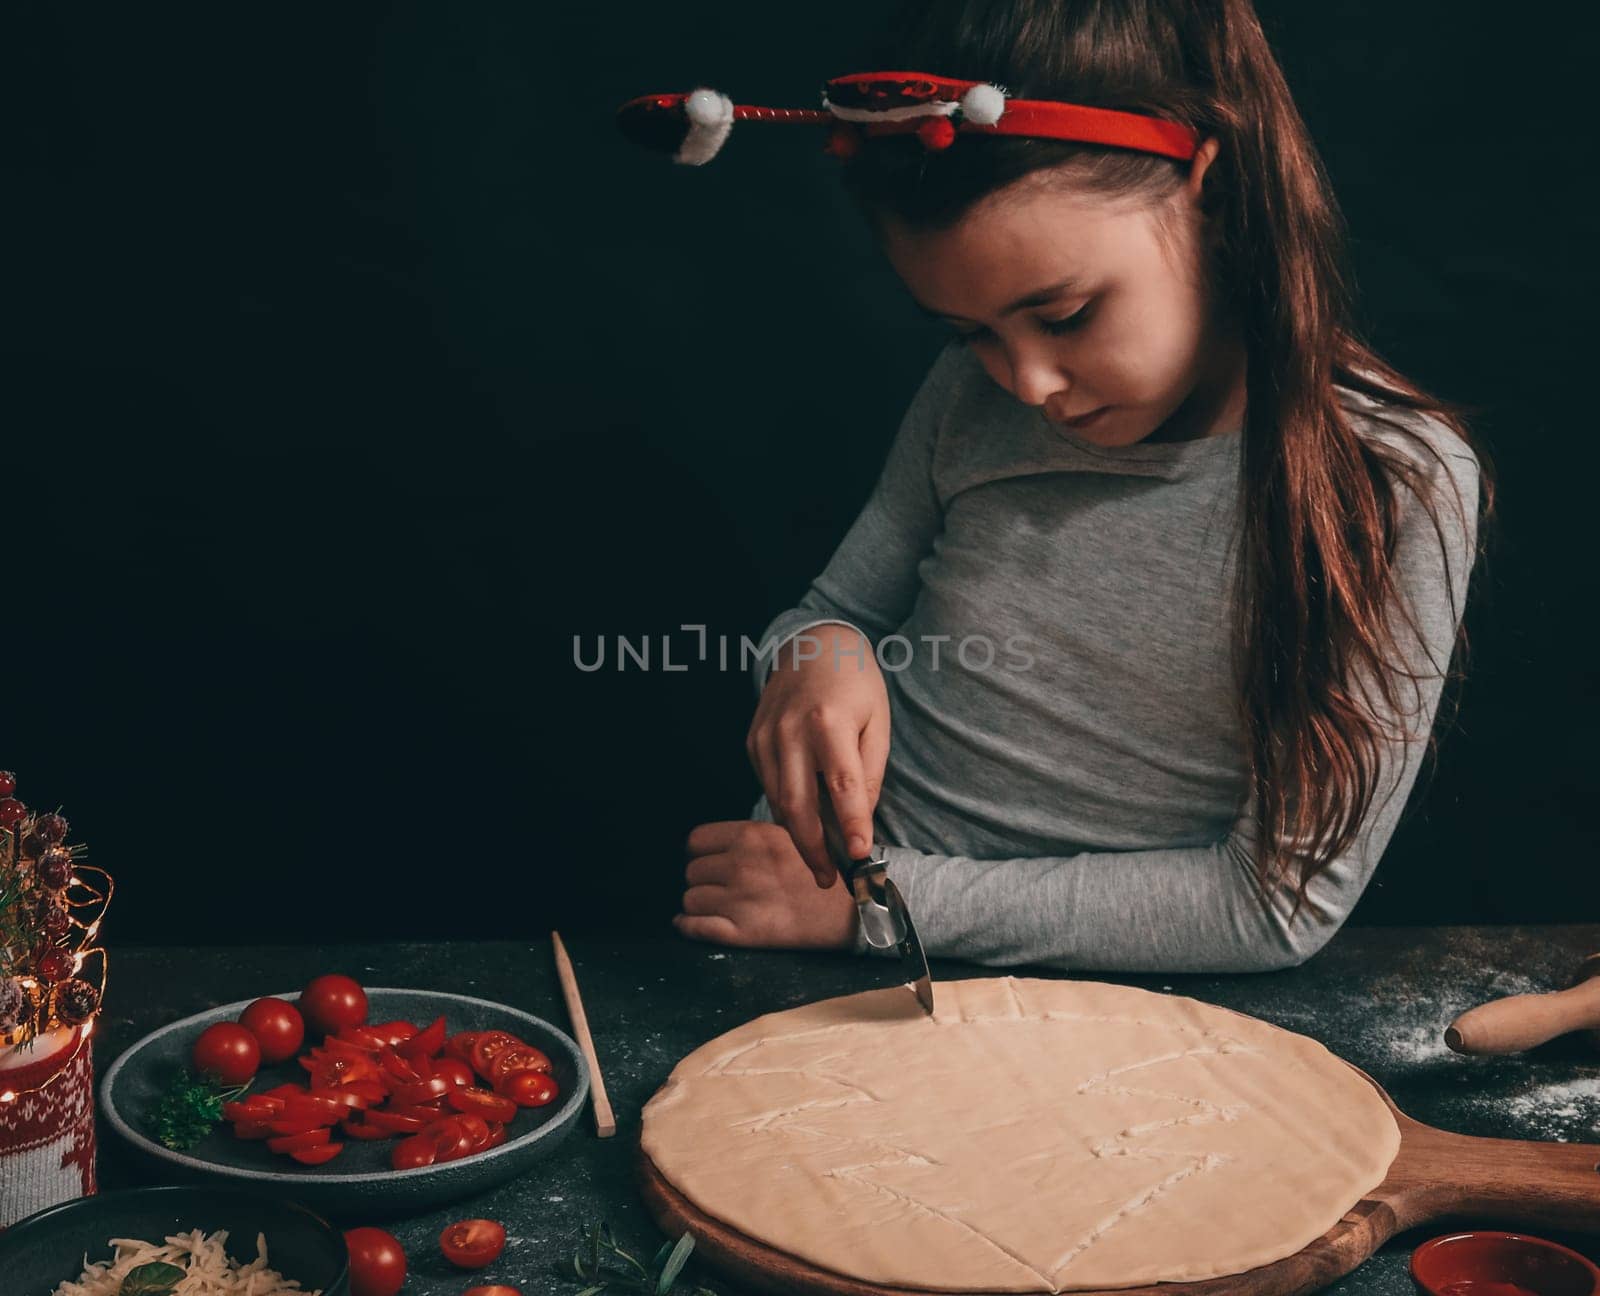 A Caucasian little girl cuts a Christmas tree with a round moon knife on a pizza dough, and next to a rolling pin, sliced cherry tomatoes, ketchup and a decoration in a mug with a sweater on a dark background, close-up side view.